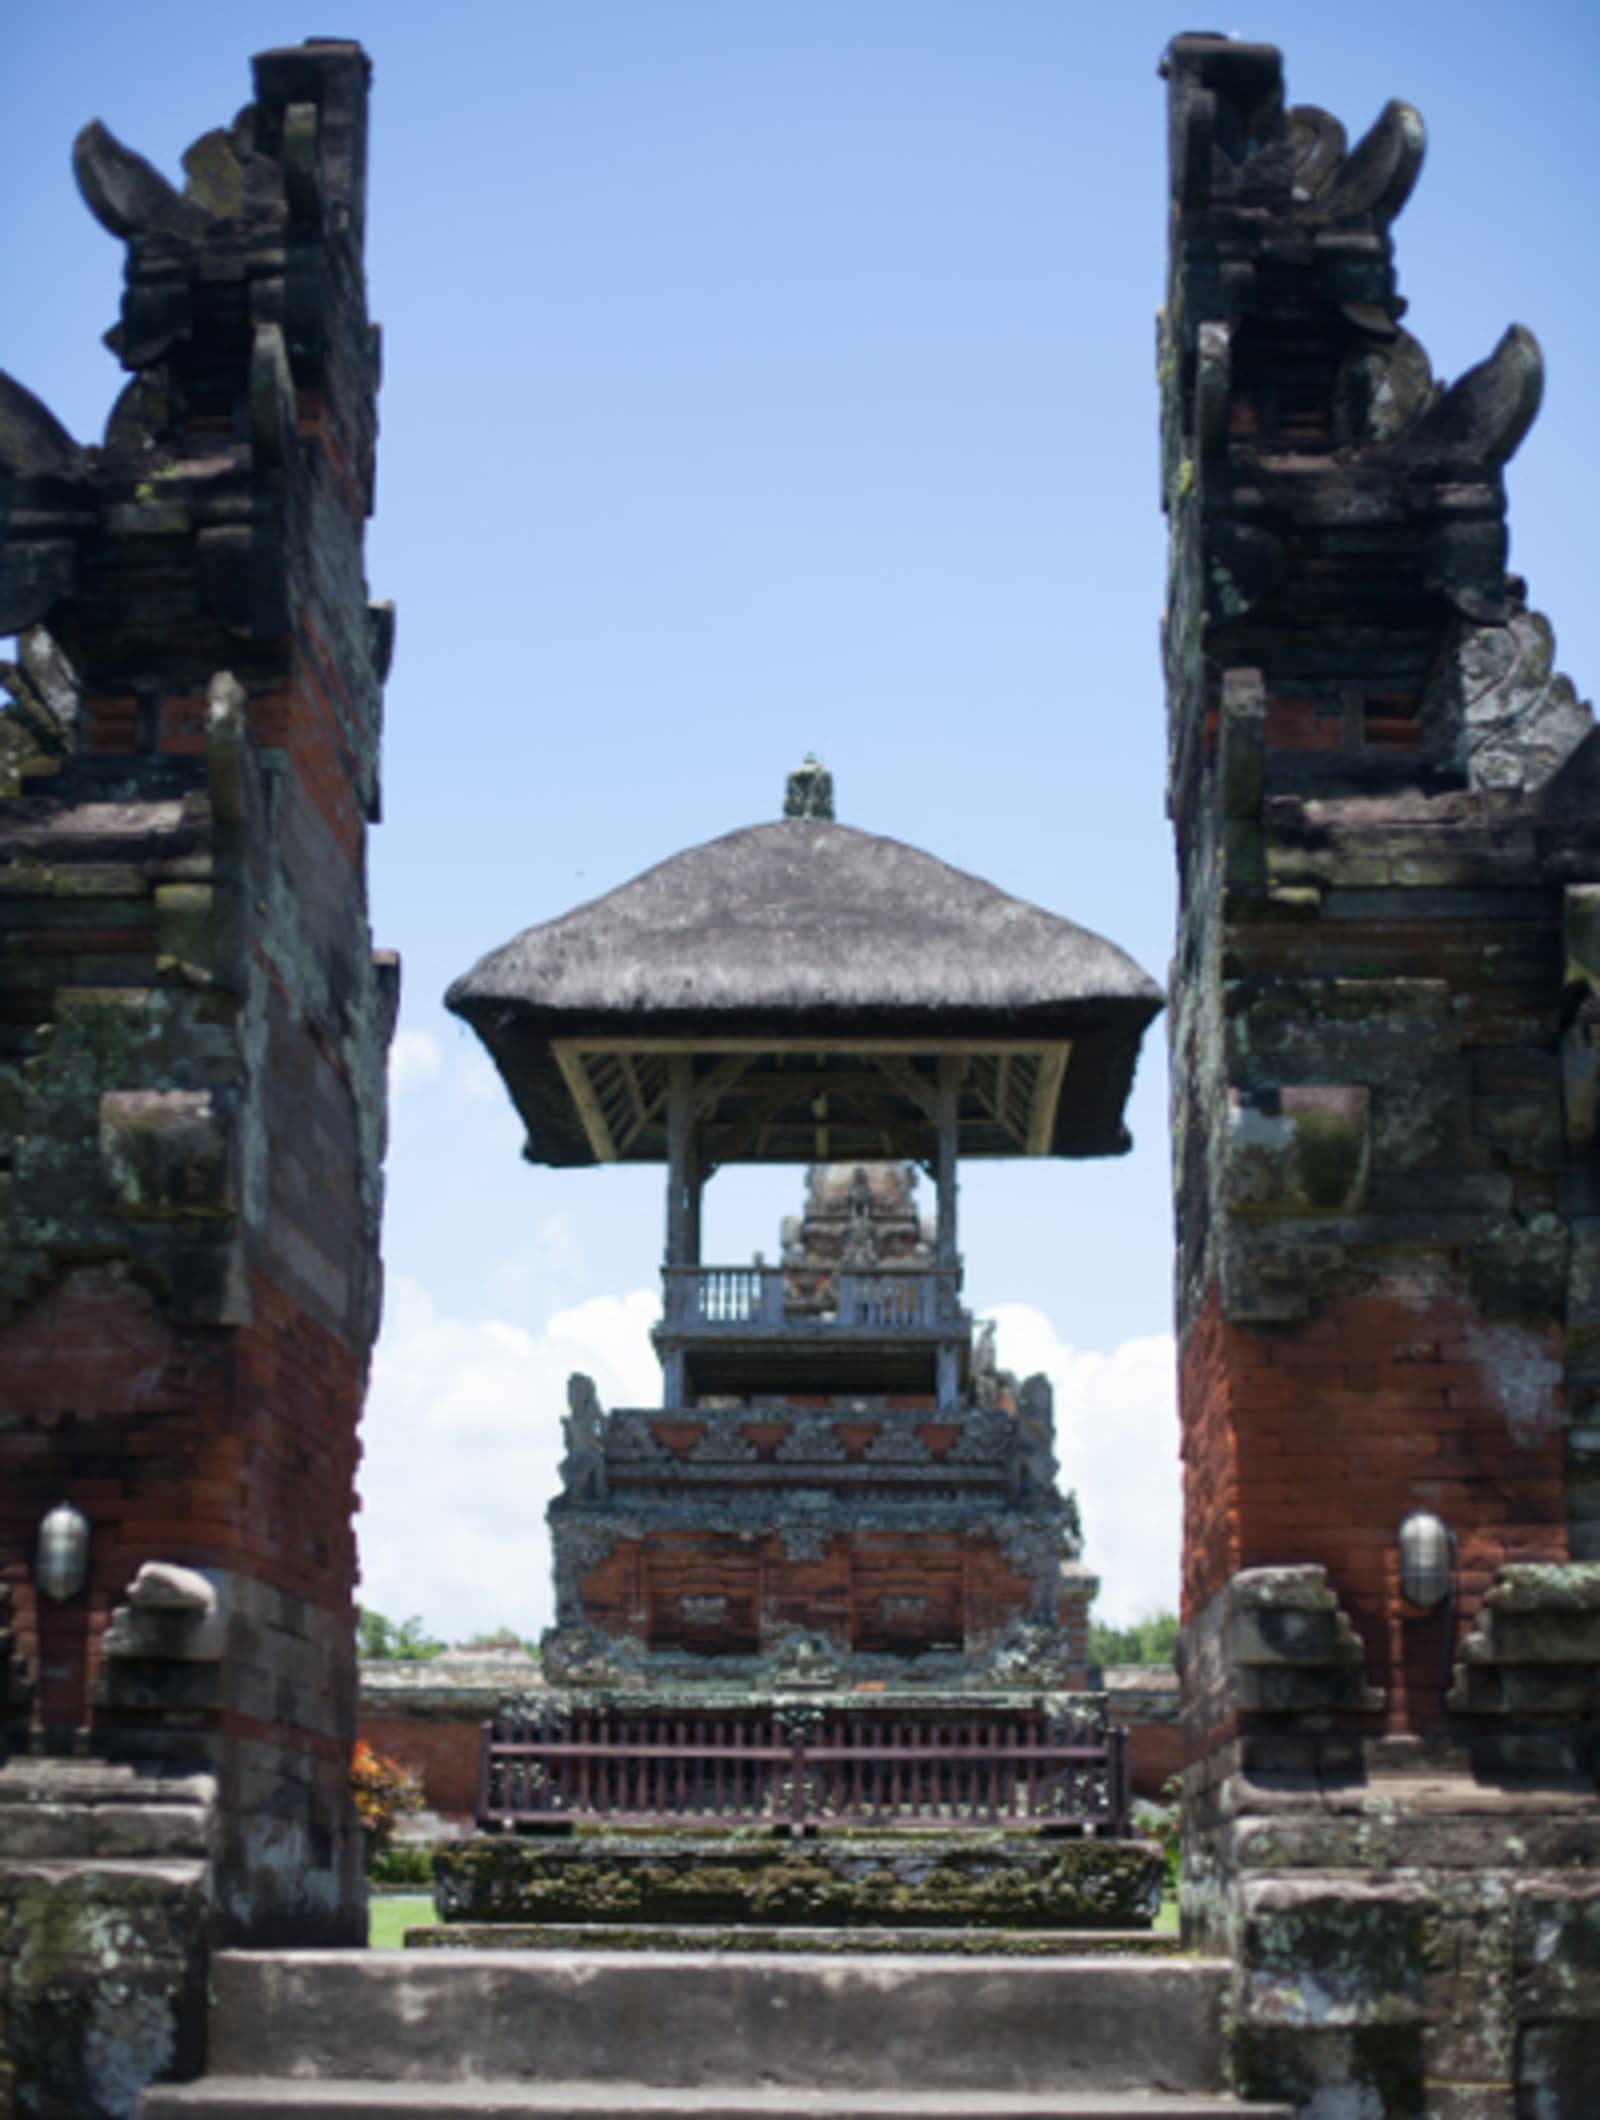 Pura Taman Ayun - temple with imposing spires built alongside, on a bright sunny day